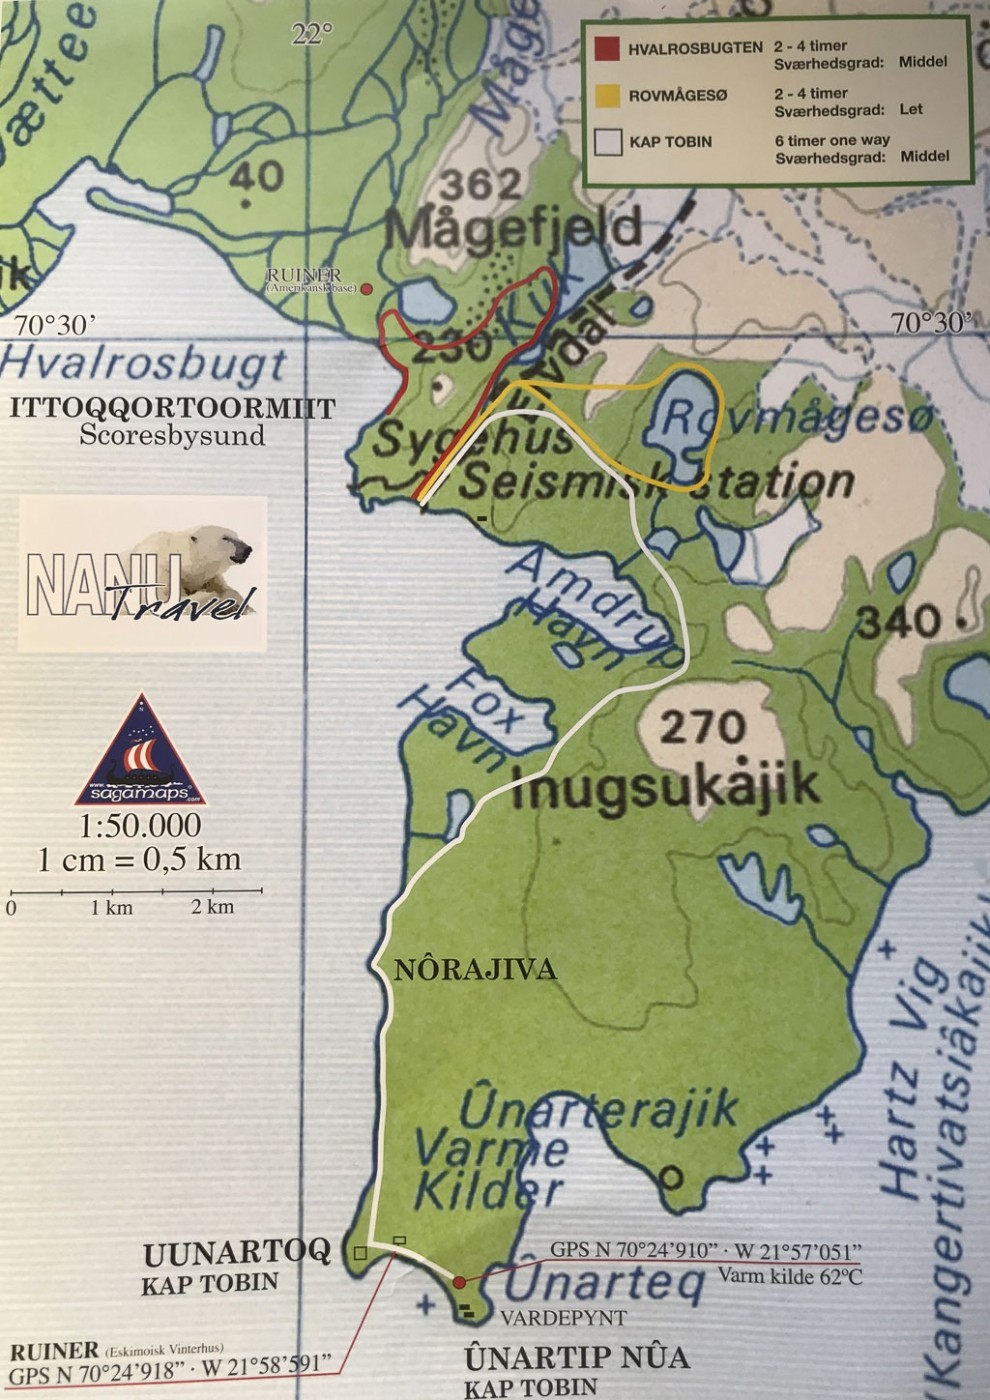 Map of Ittoqqortoormiit, White hiking route. Photo by Bo Normander.